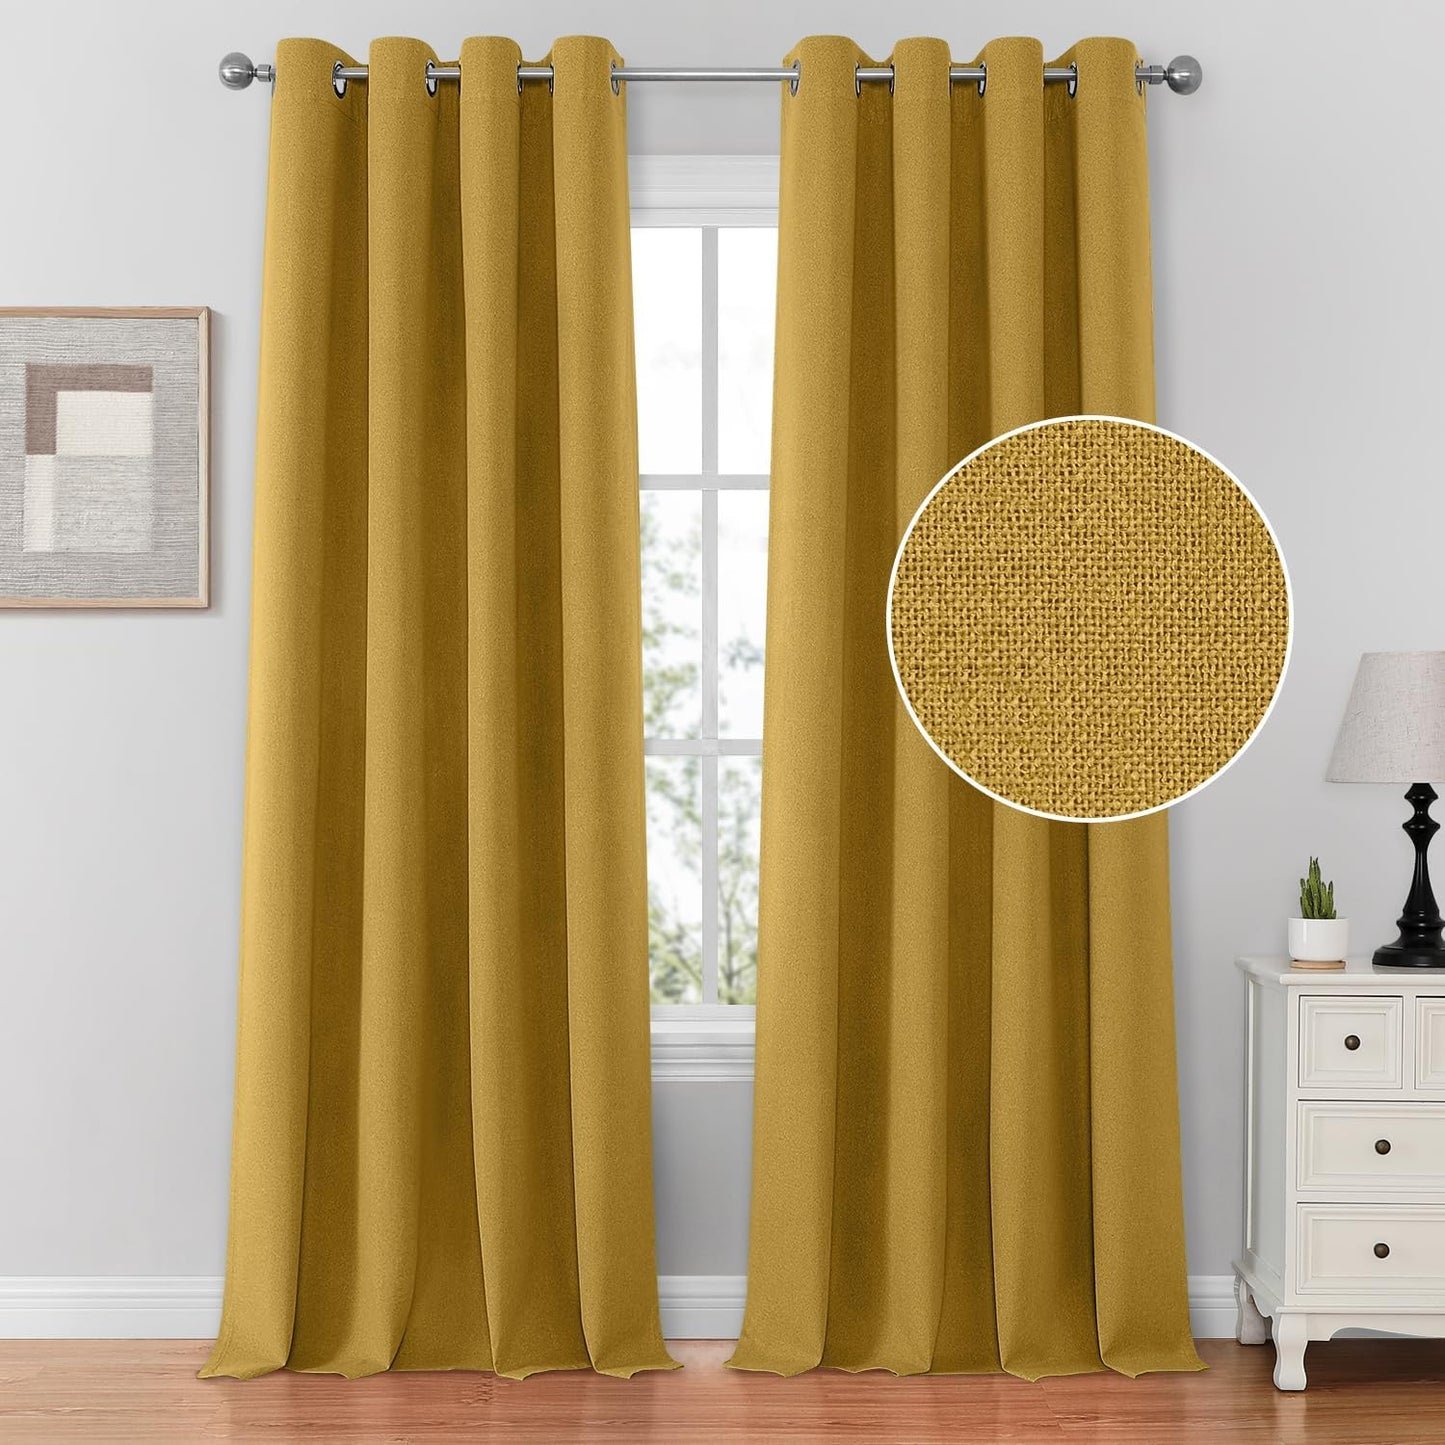 HOMEIDEAS 100% Blush Pink Linen Blackout Curtains for Bedroom, 52 X 84 Inch Room Darkening Curtains for Living, Faux Linen Thermal Insulated Full Black Out Grommet Window Curtains/Drapes  HOMEIDEAS Mustard Yellow W52" X L84" 